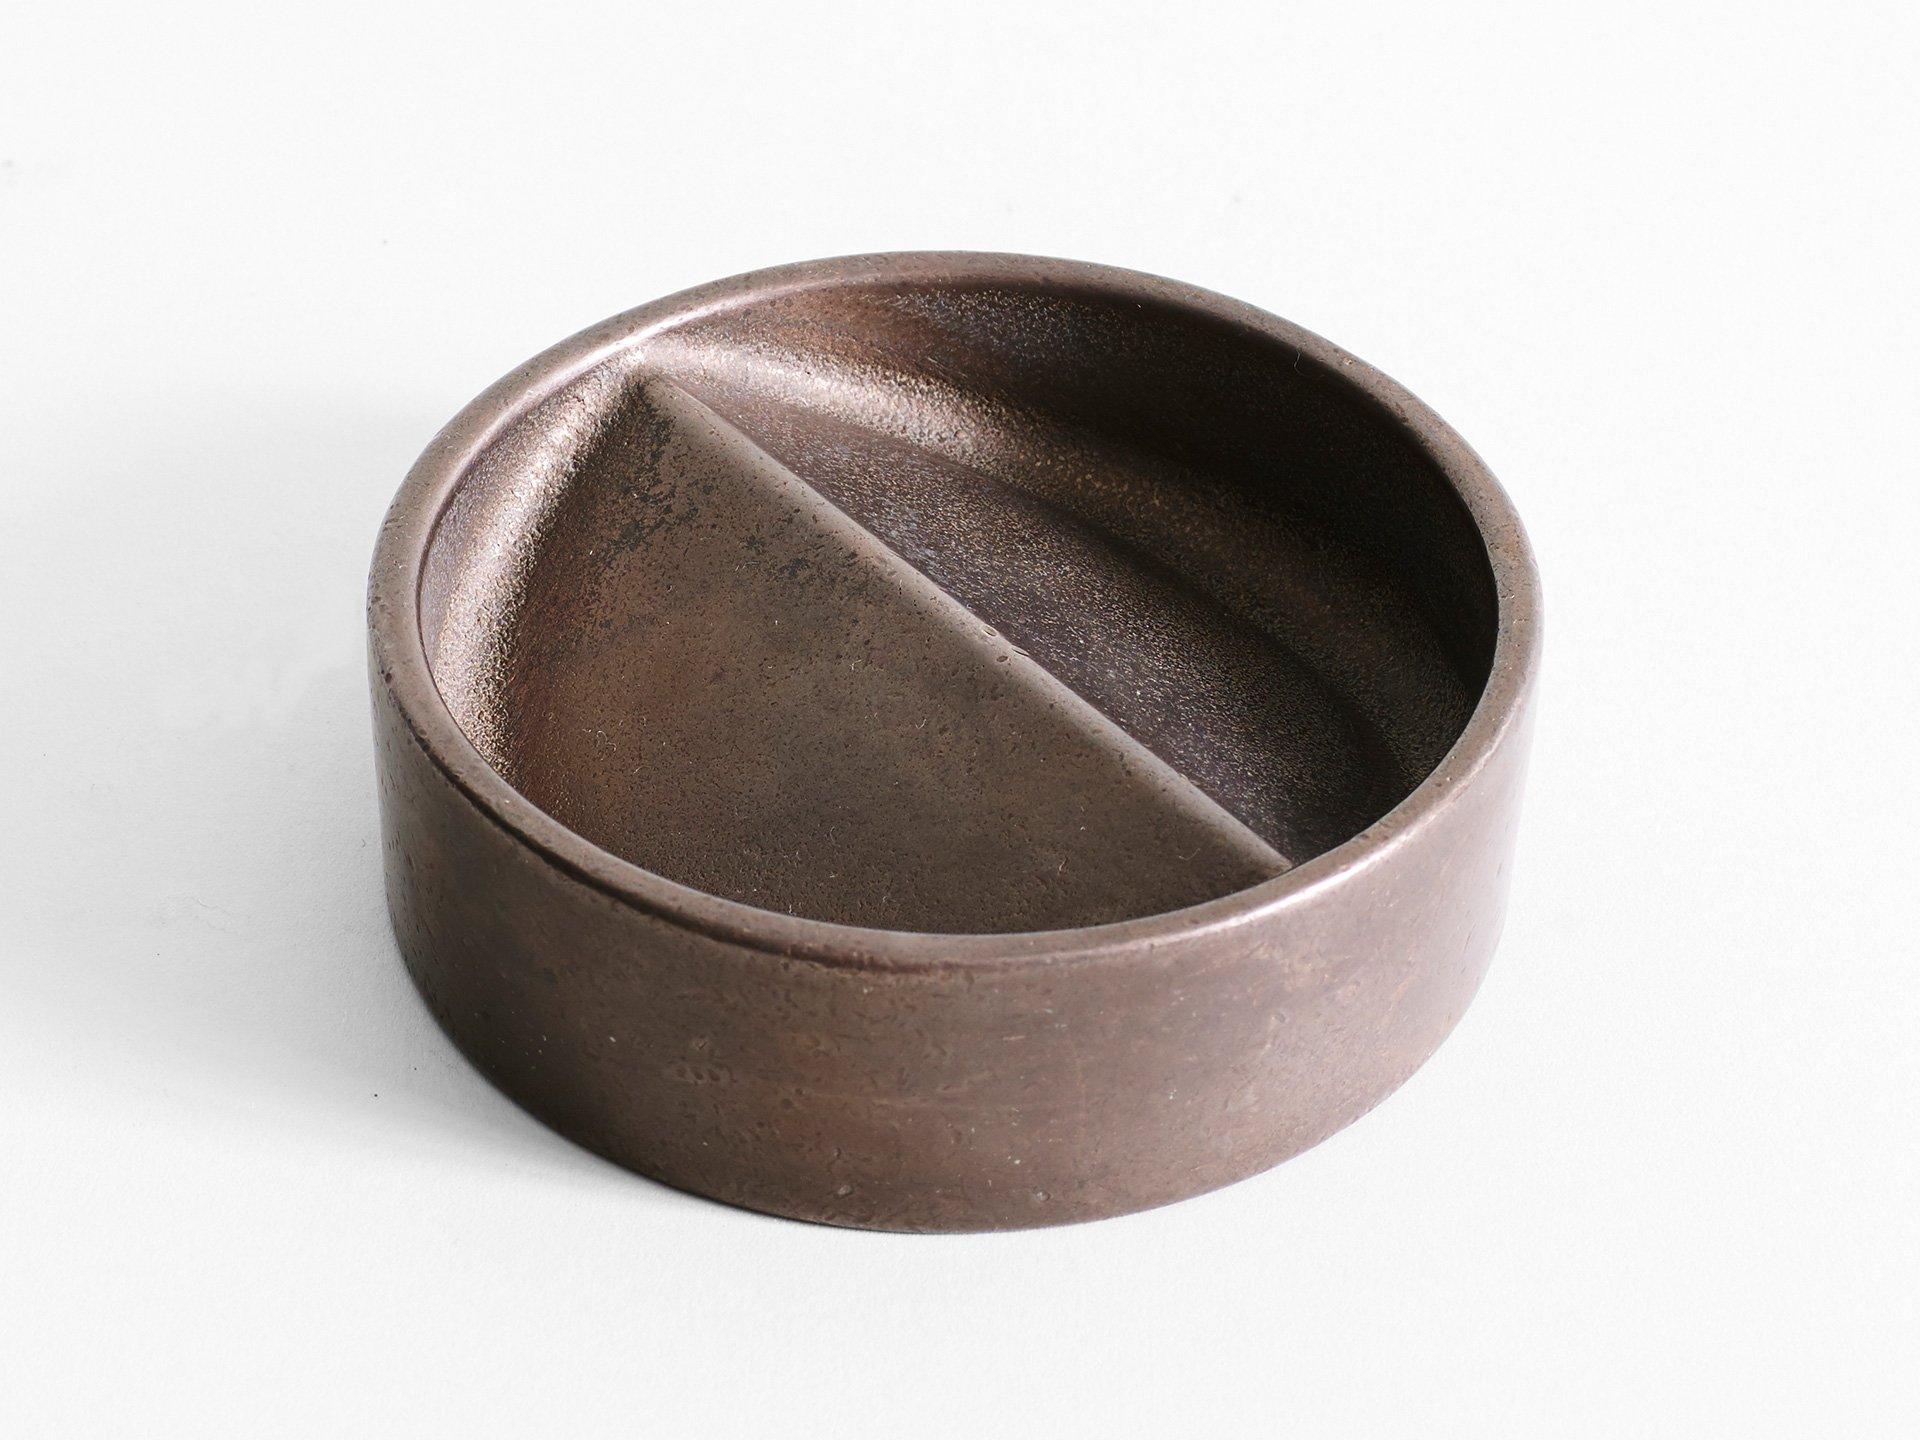 Vide Poche Rond by Henry Wilson
Dimensions: D 13 x H 4 cm
Materials: Bronze

Discard your day at the door. 

Your Vide Poche is designed with your loose-pocket items in mind – think keys, change and phone. It is made, polished and finished in